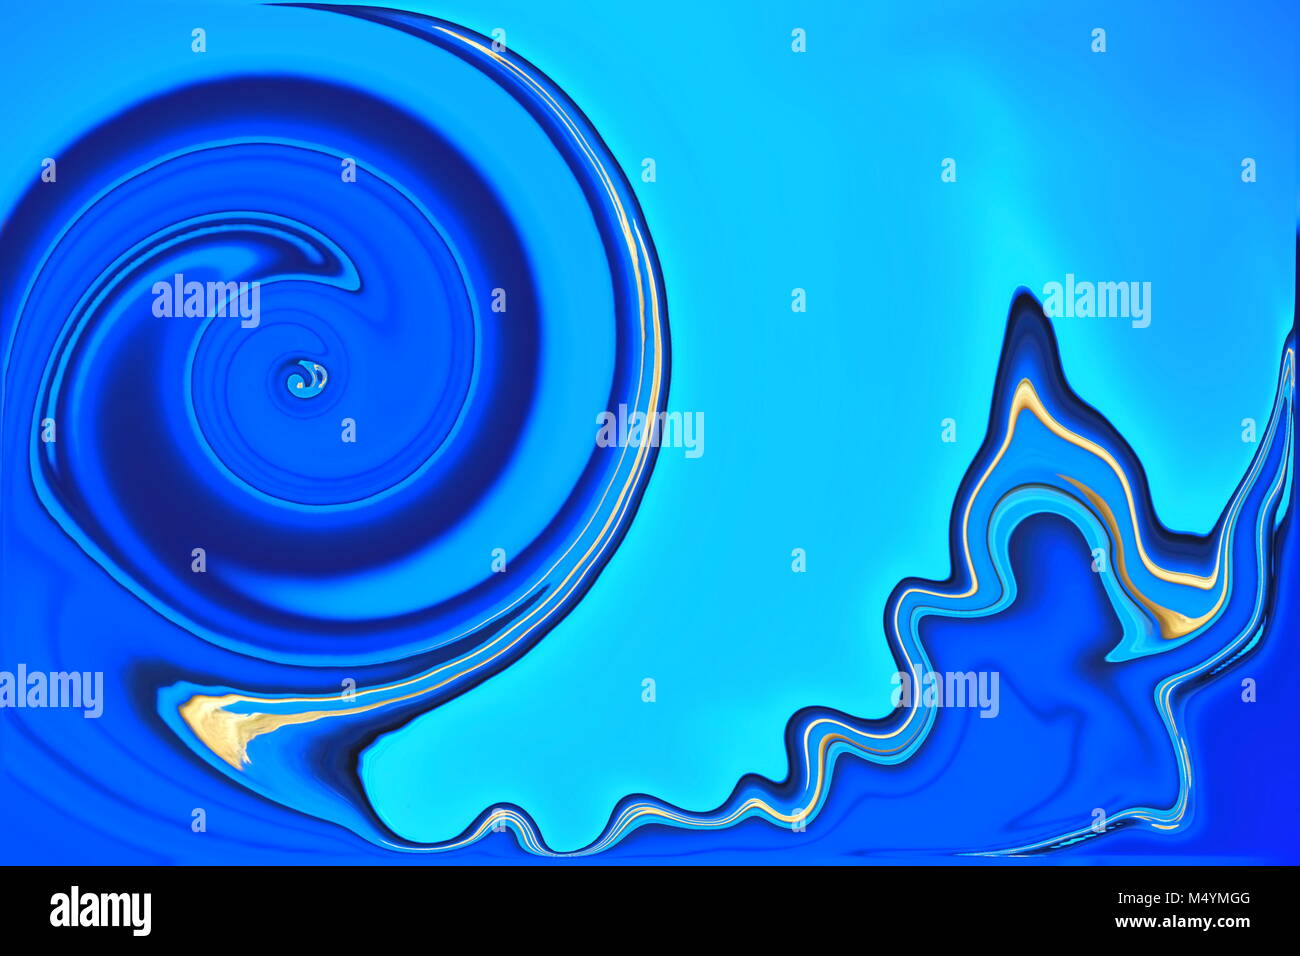 Distorted wavy  picture in aqua blue shades. Bright abstract swirl  background. Stock Photo